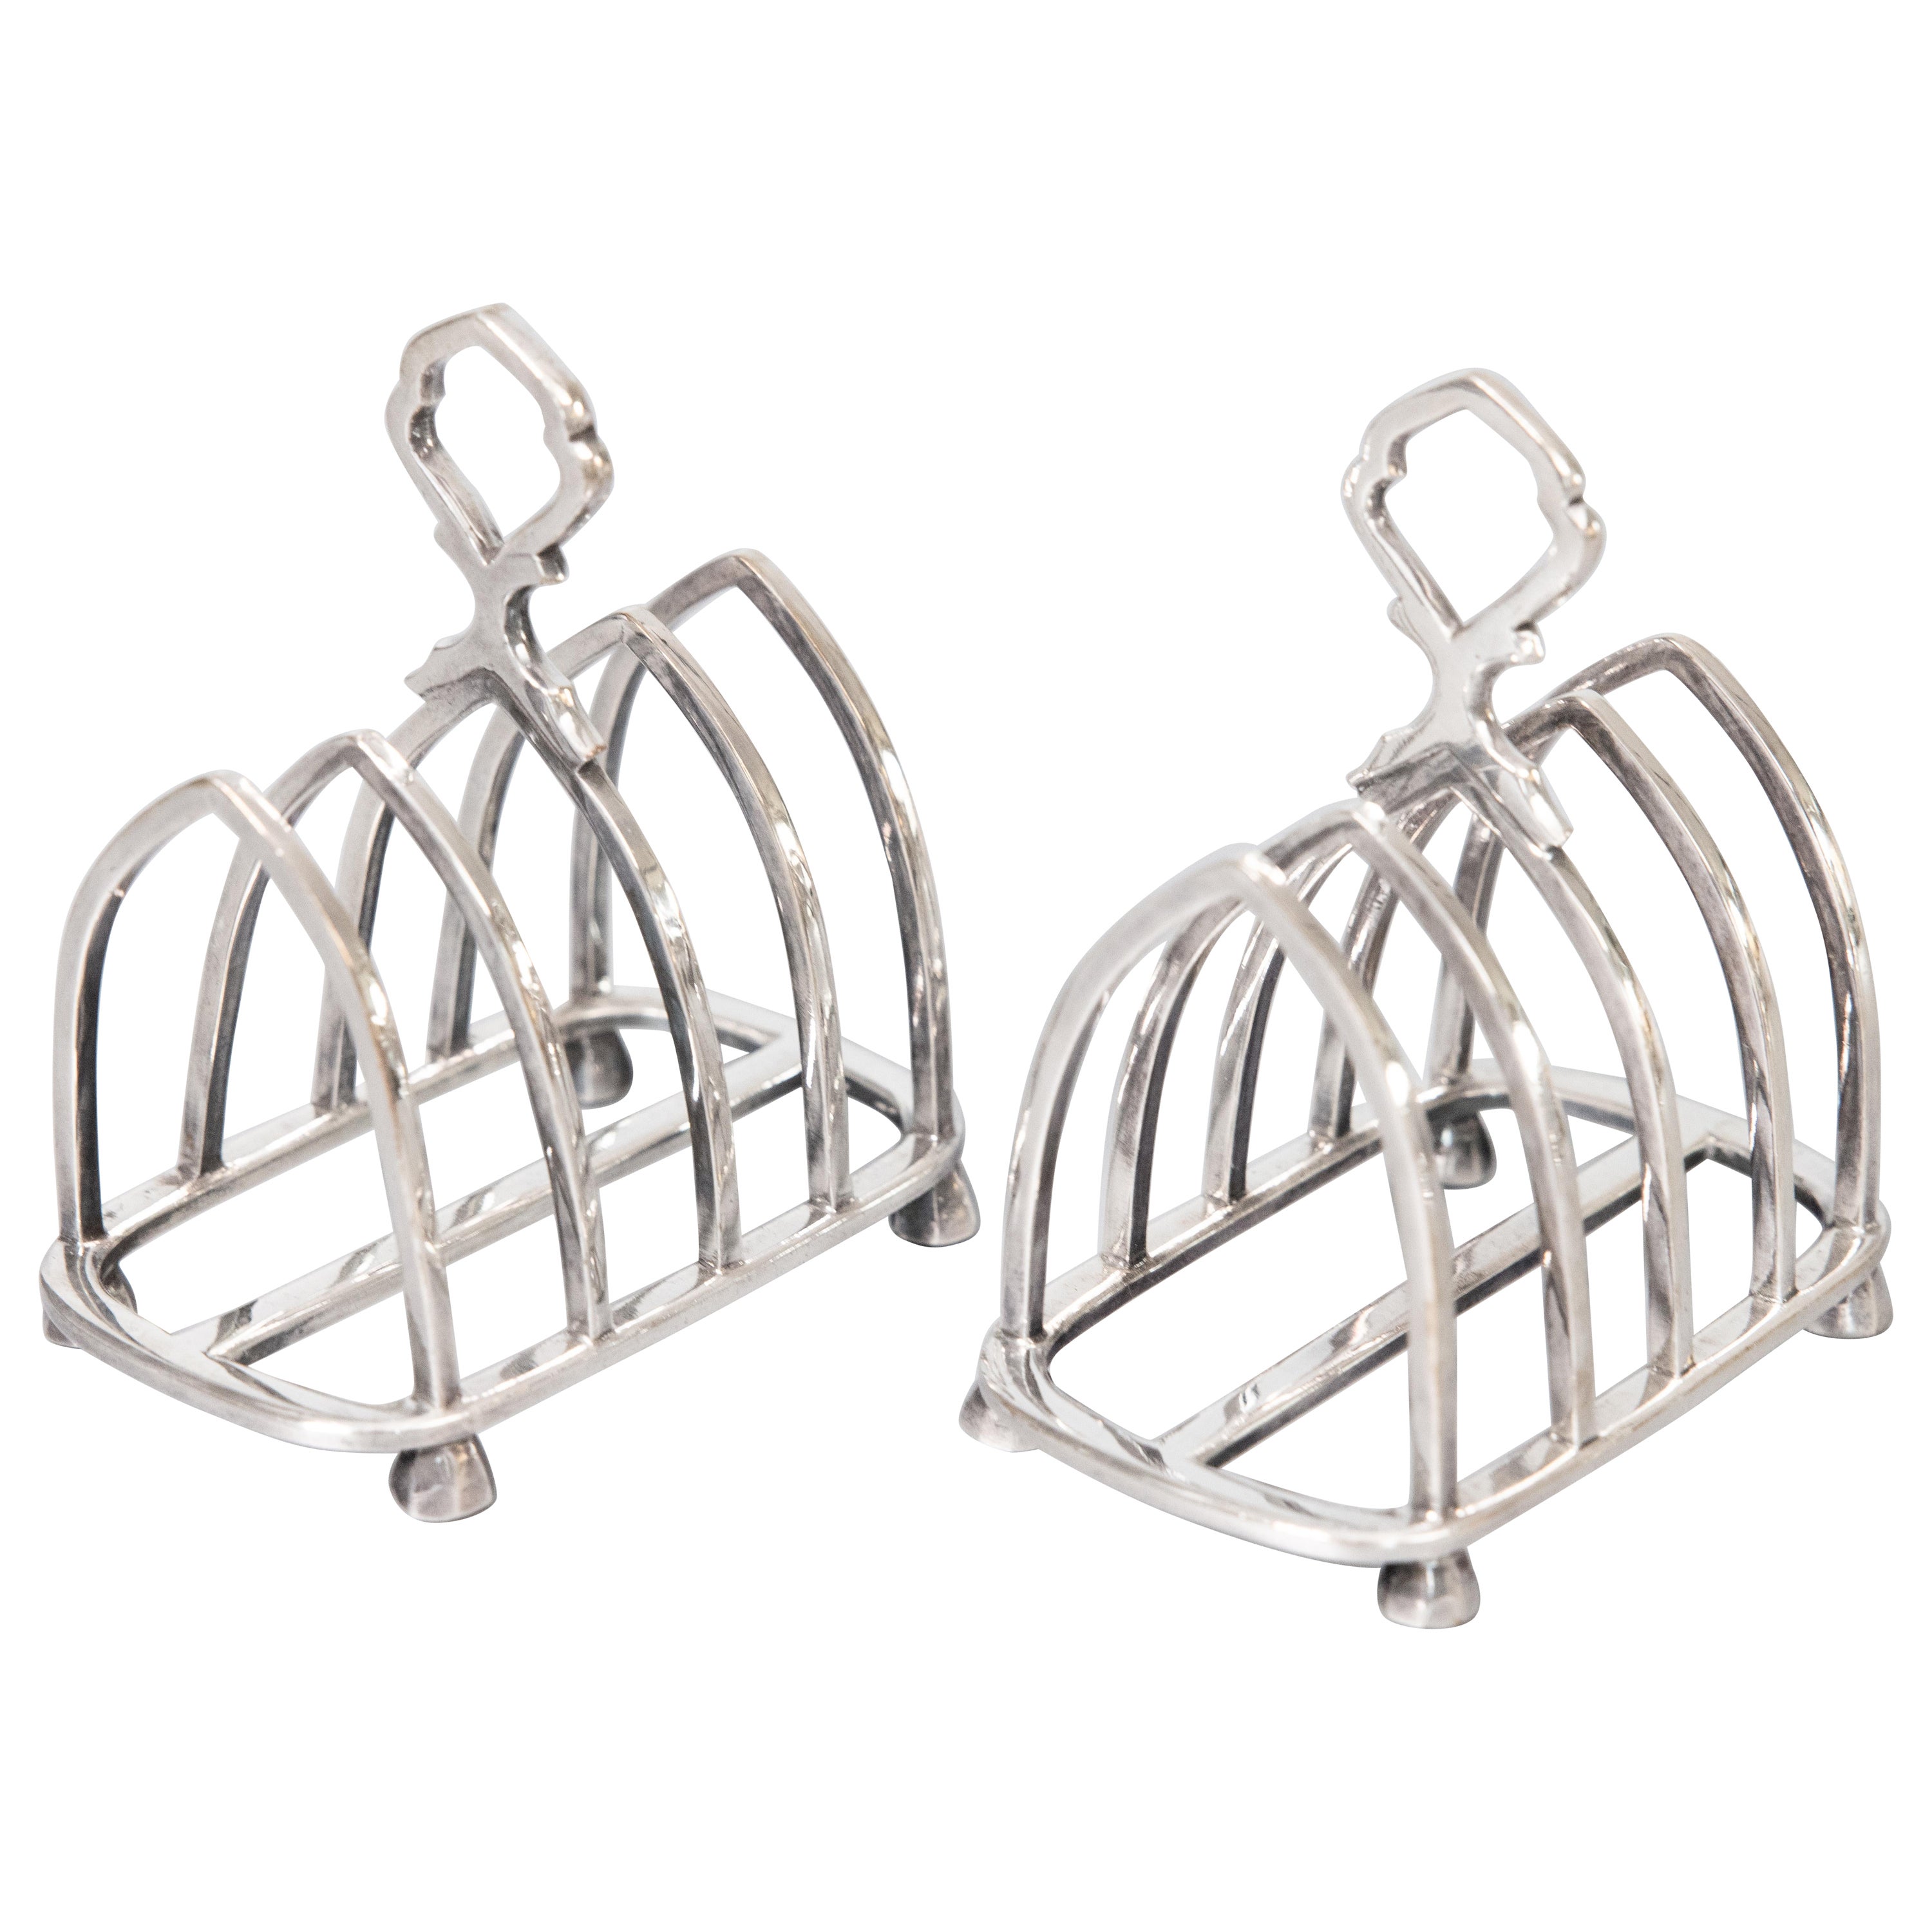 Pair of Antique English Gothic Style Silver Plate Toast Racks, dated 1923 For Sale